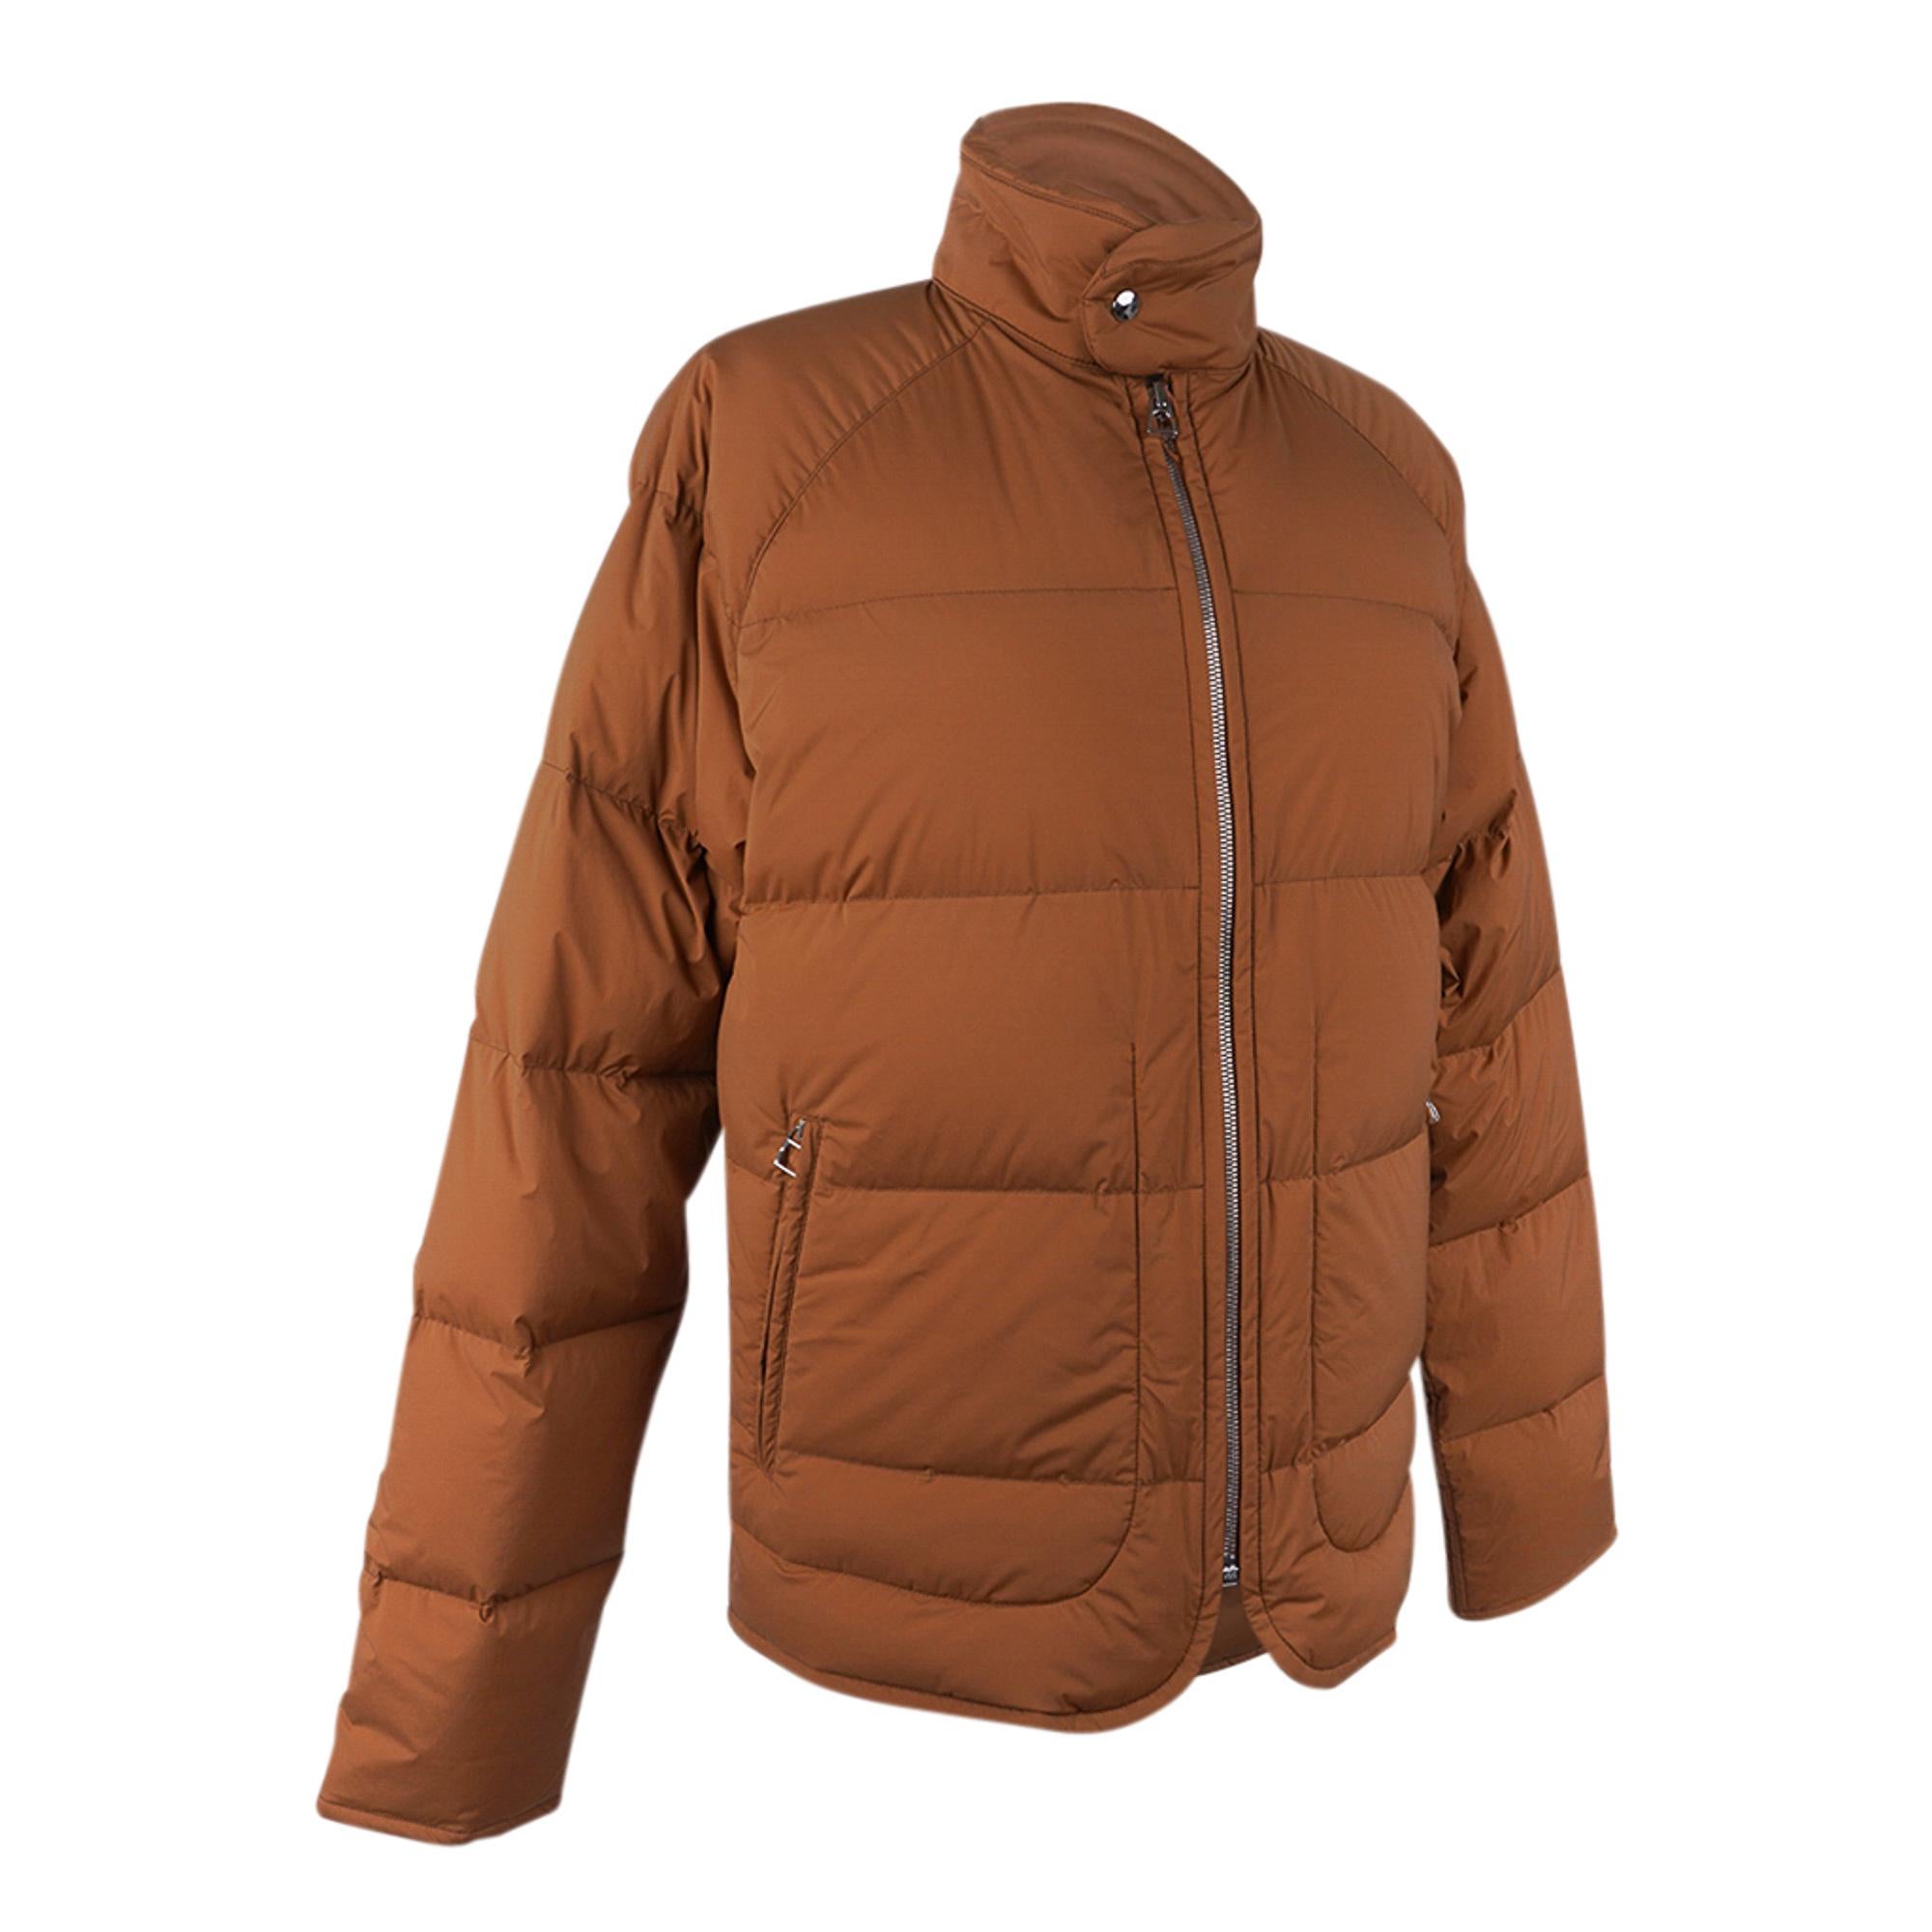 Mightychic offers an Hermes Men's Piumino extra-light puffer coat / jacket
featured in fauve.
The jacket is insulated with pure goose down duvet making it warm and light weight.
Strerch fabric has a matte finish and a tailored fit
Clou de Selle snap